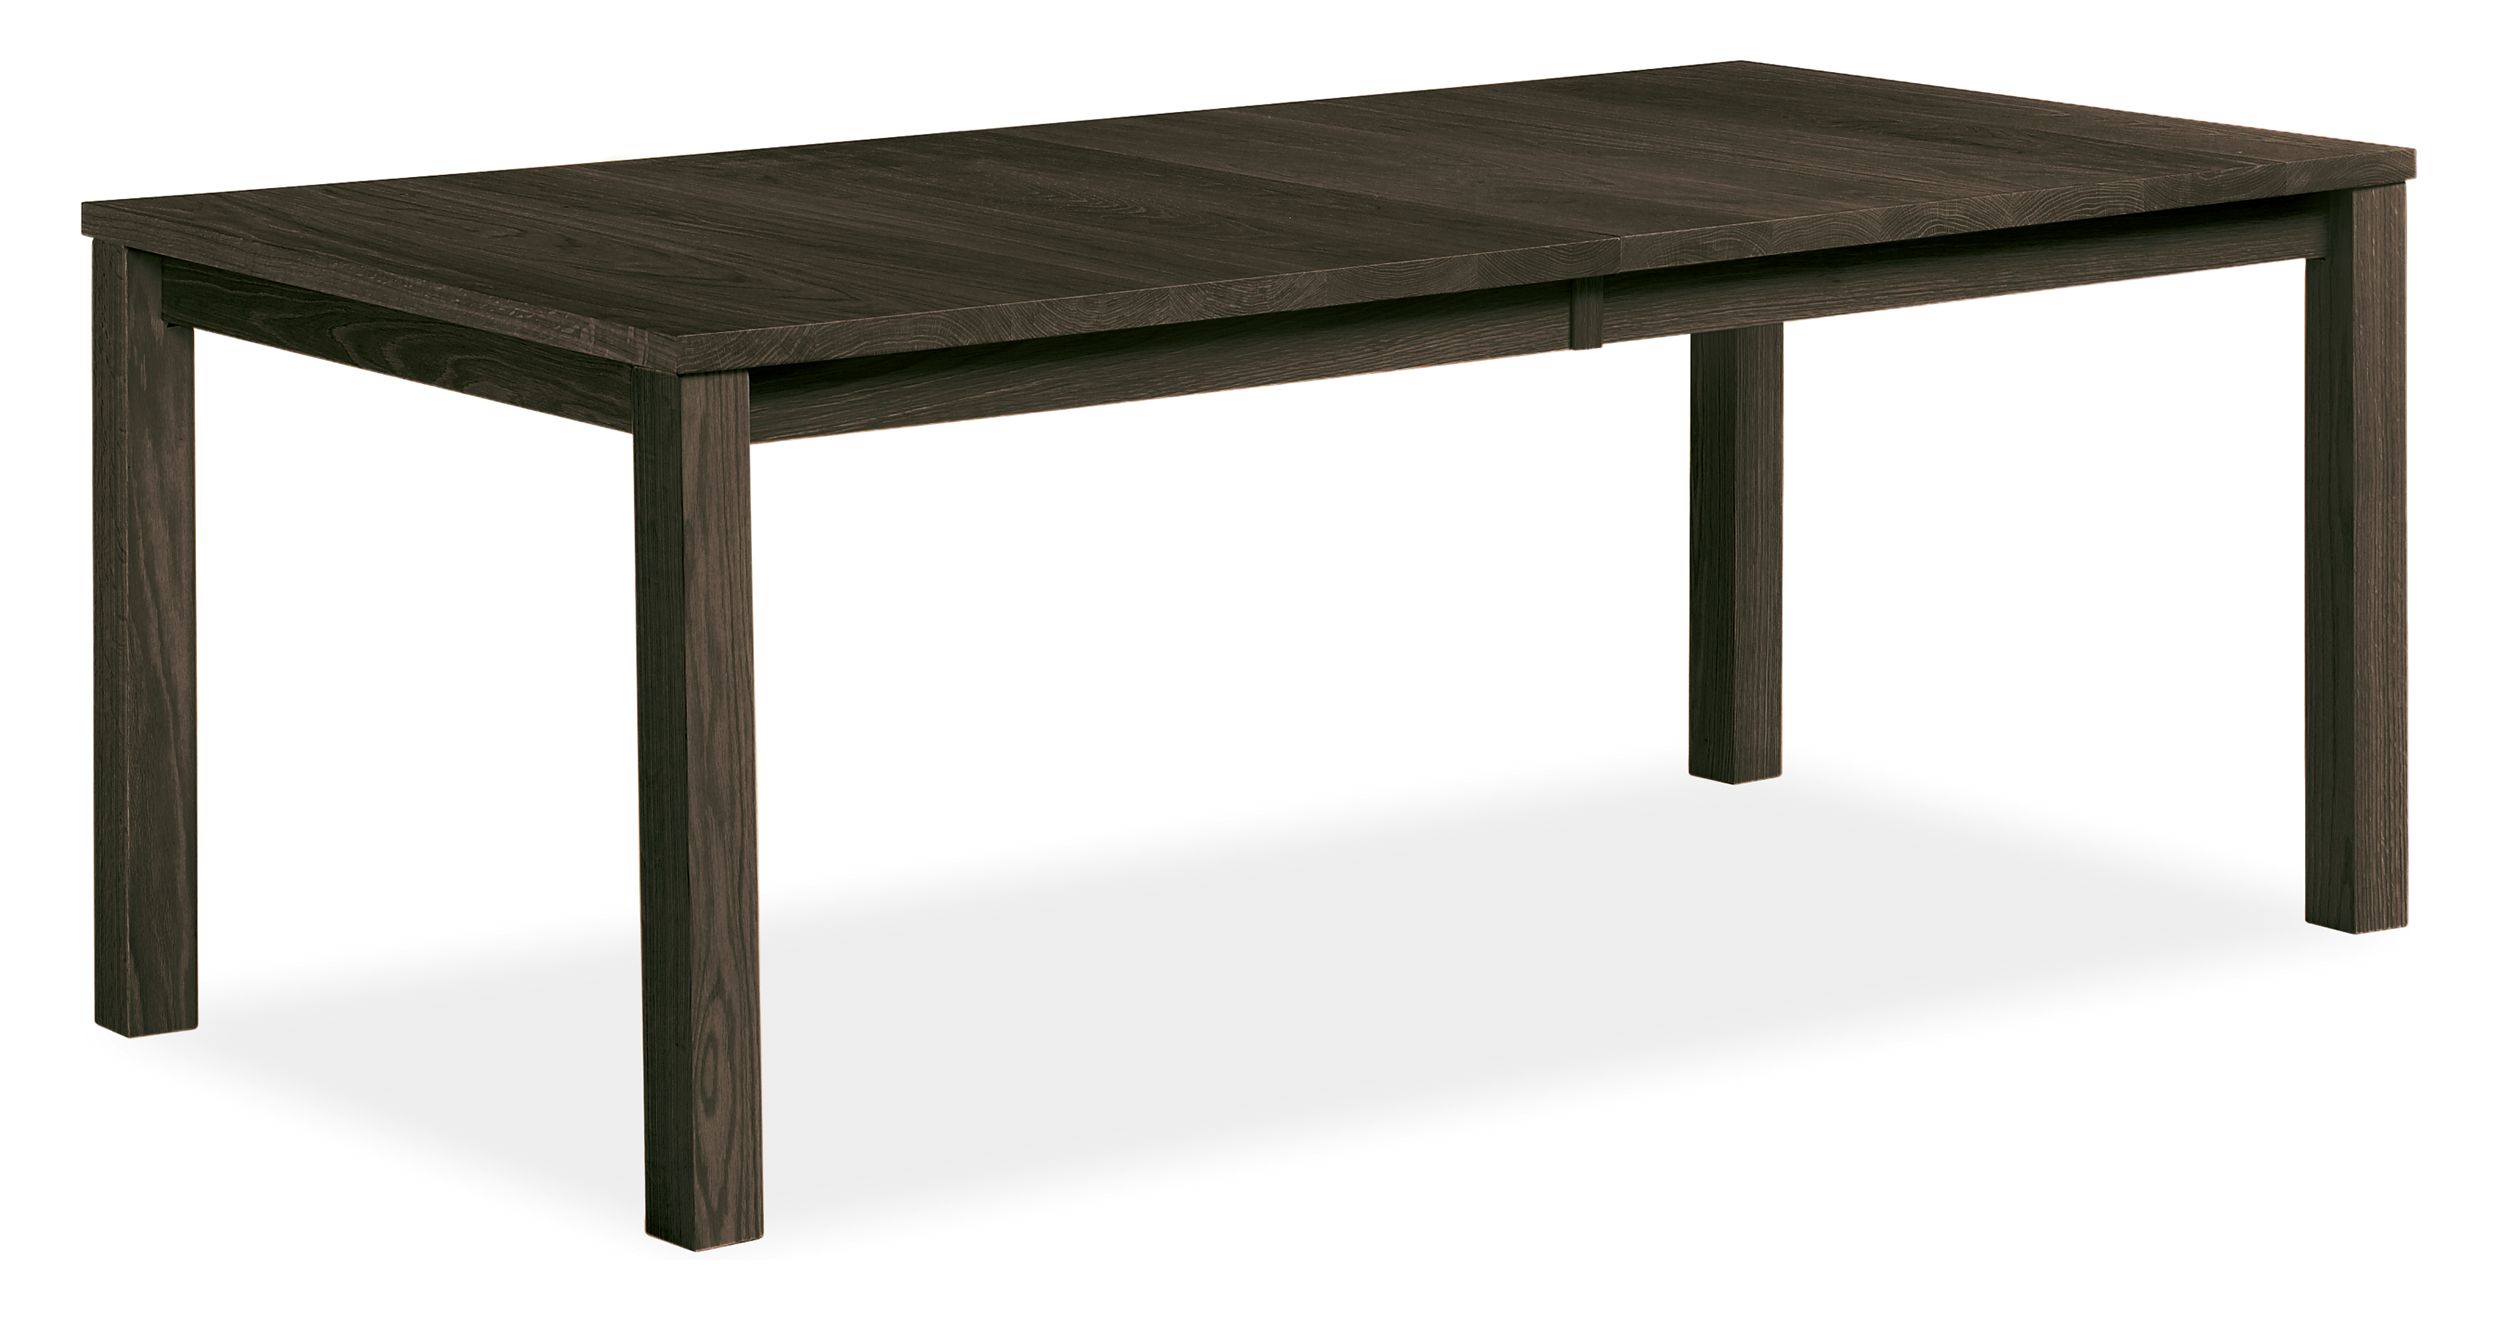 Andover Extension Tables Modern Dining Tables Modern Dining Room Kitchen Furniture Room Board